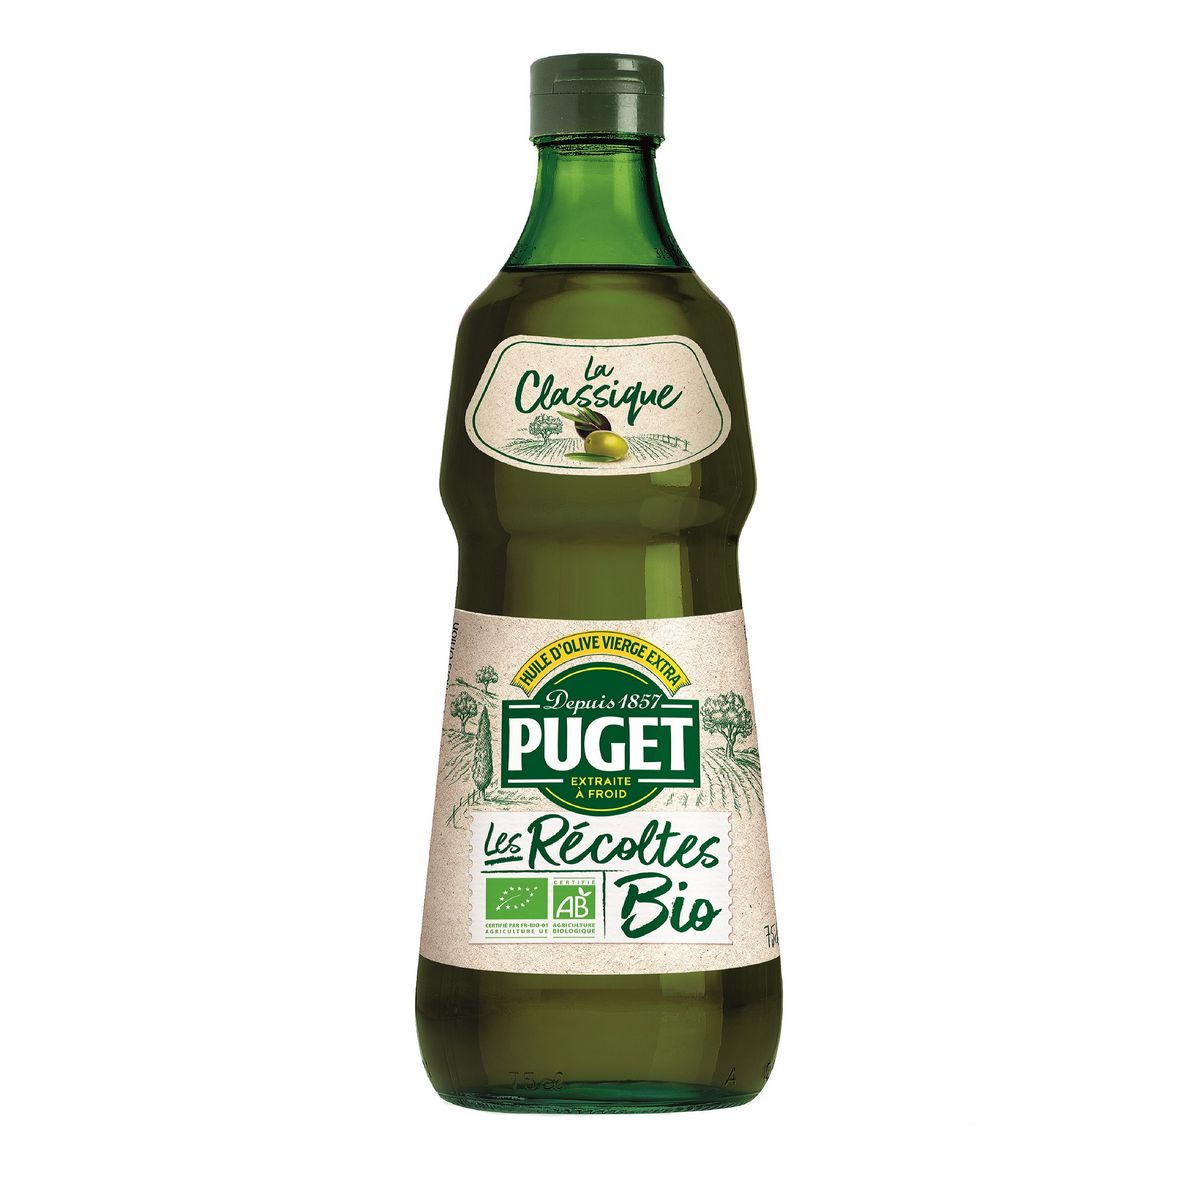 PUGET Huile d'olive vierge extra bio 75cl